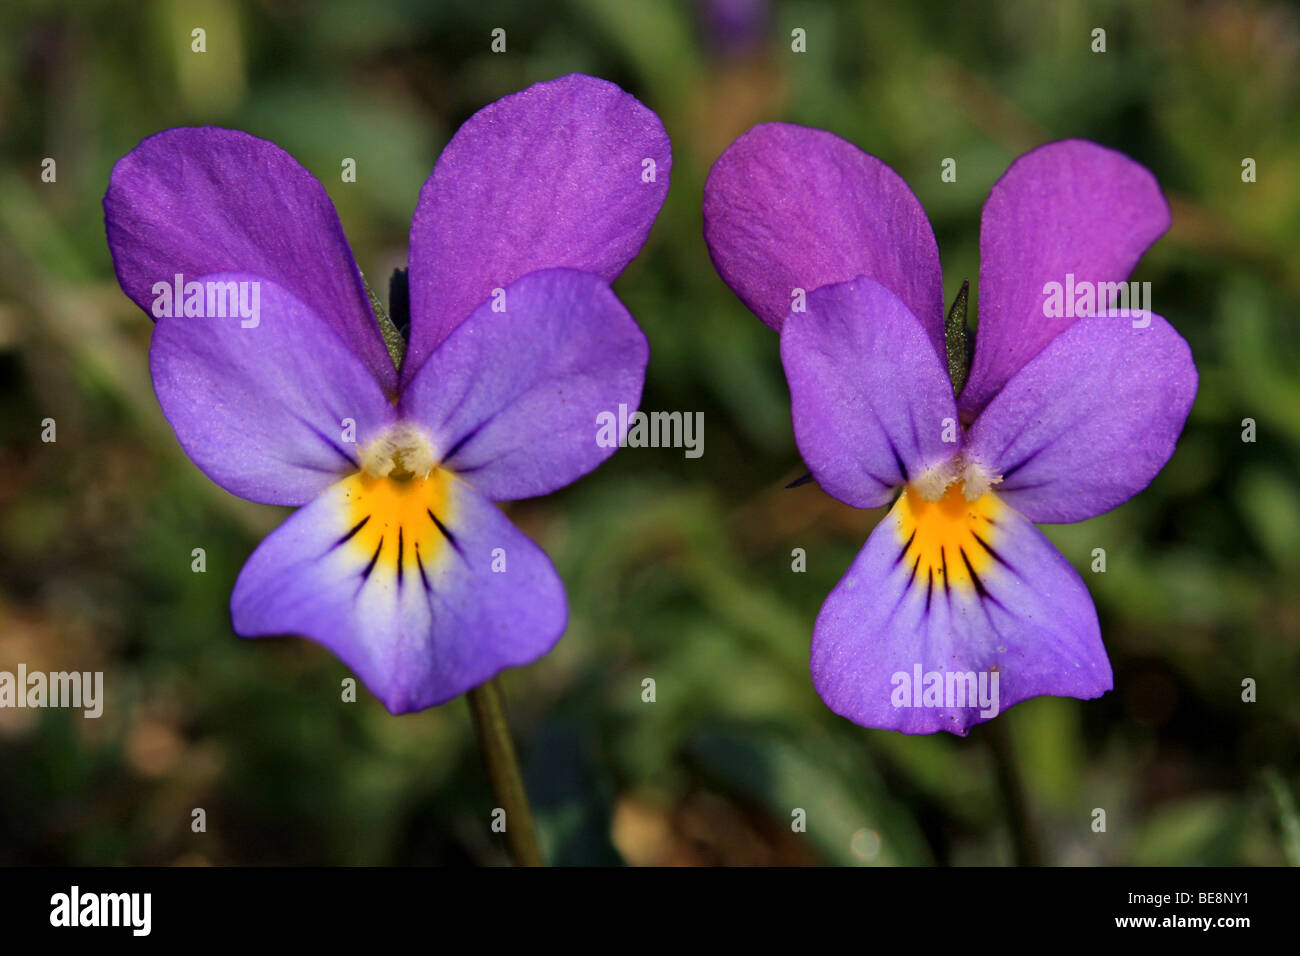 Two purple flowers of Viola curtisii, Seaside Pansy Stock Photo